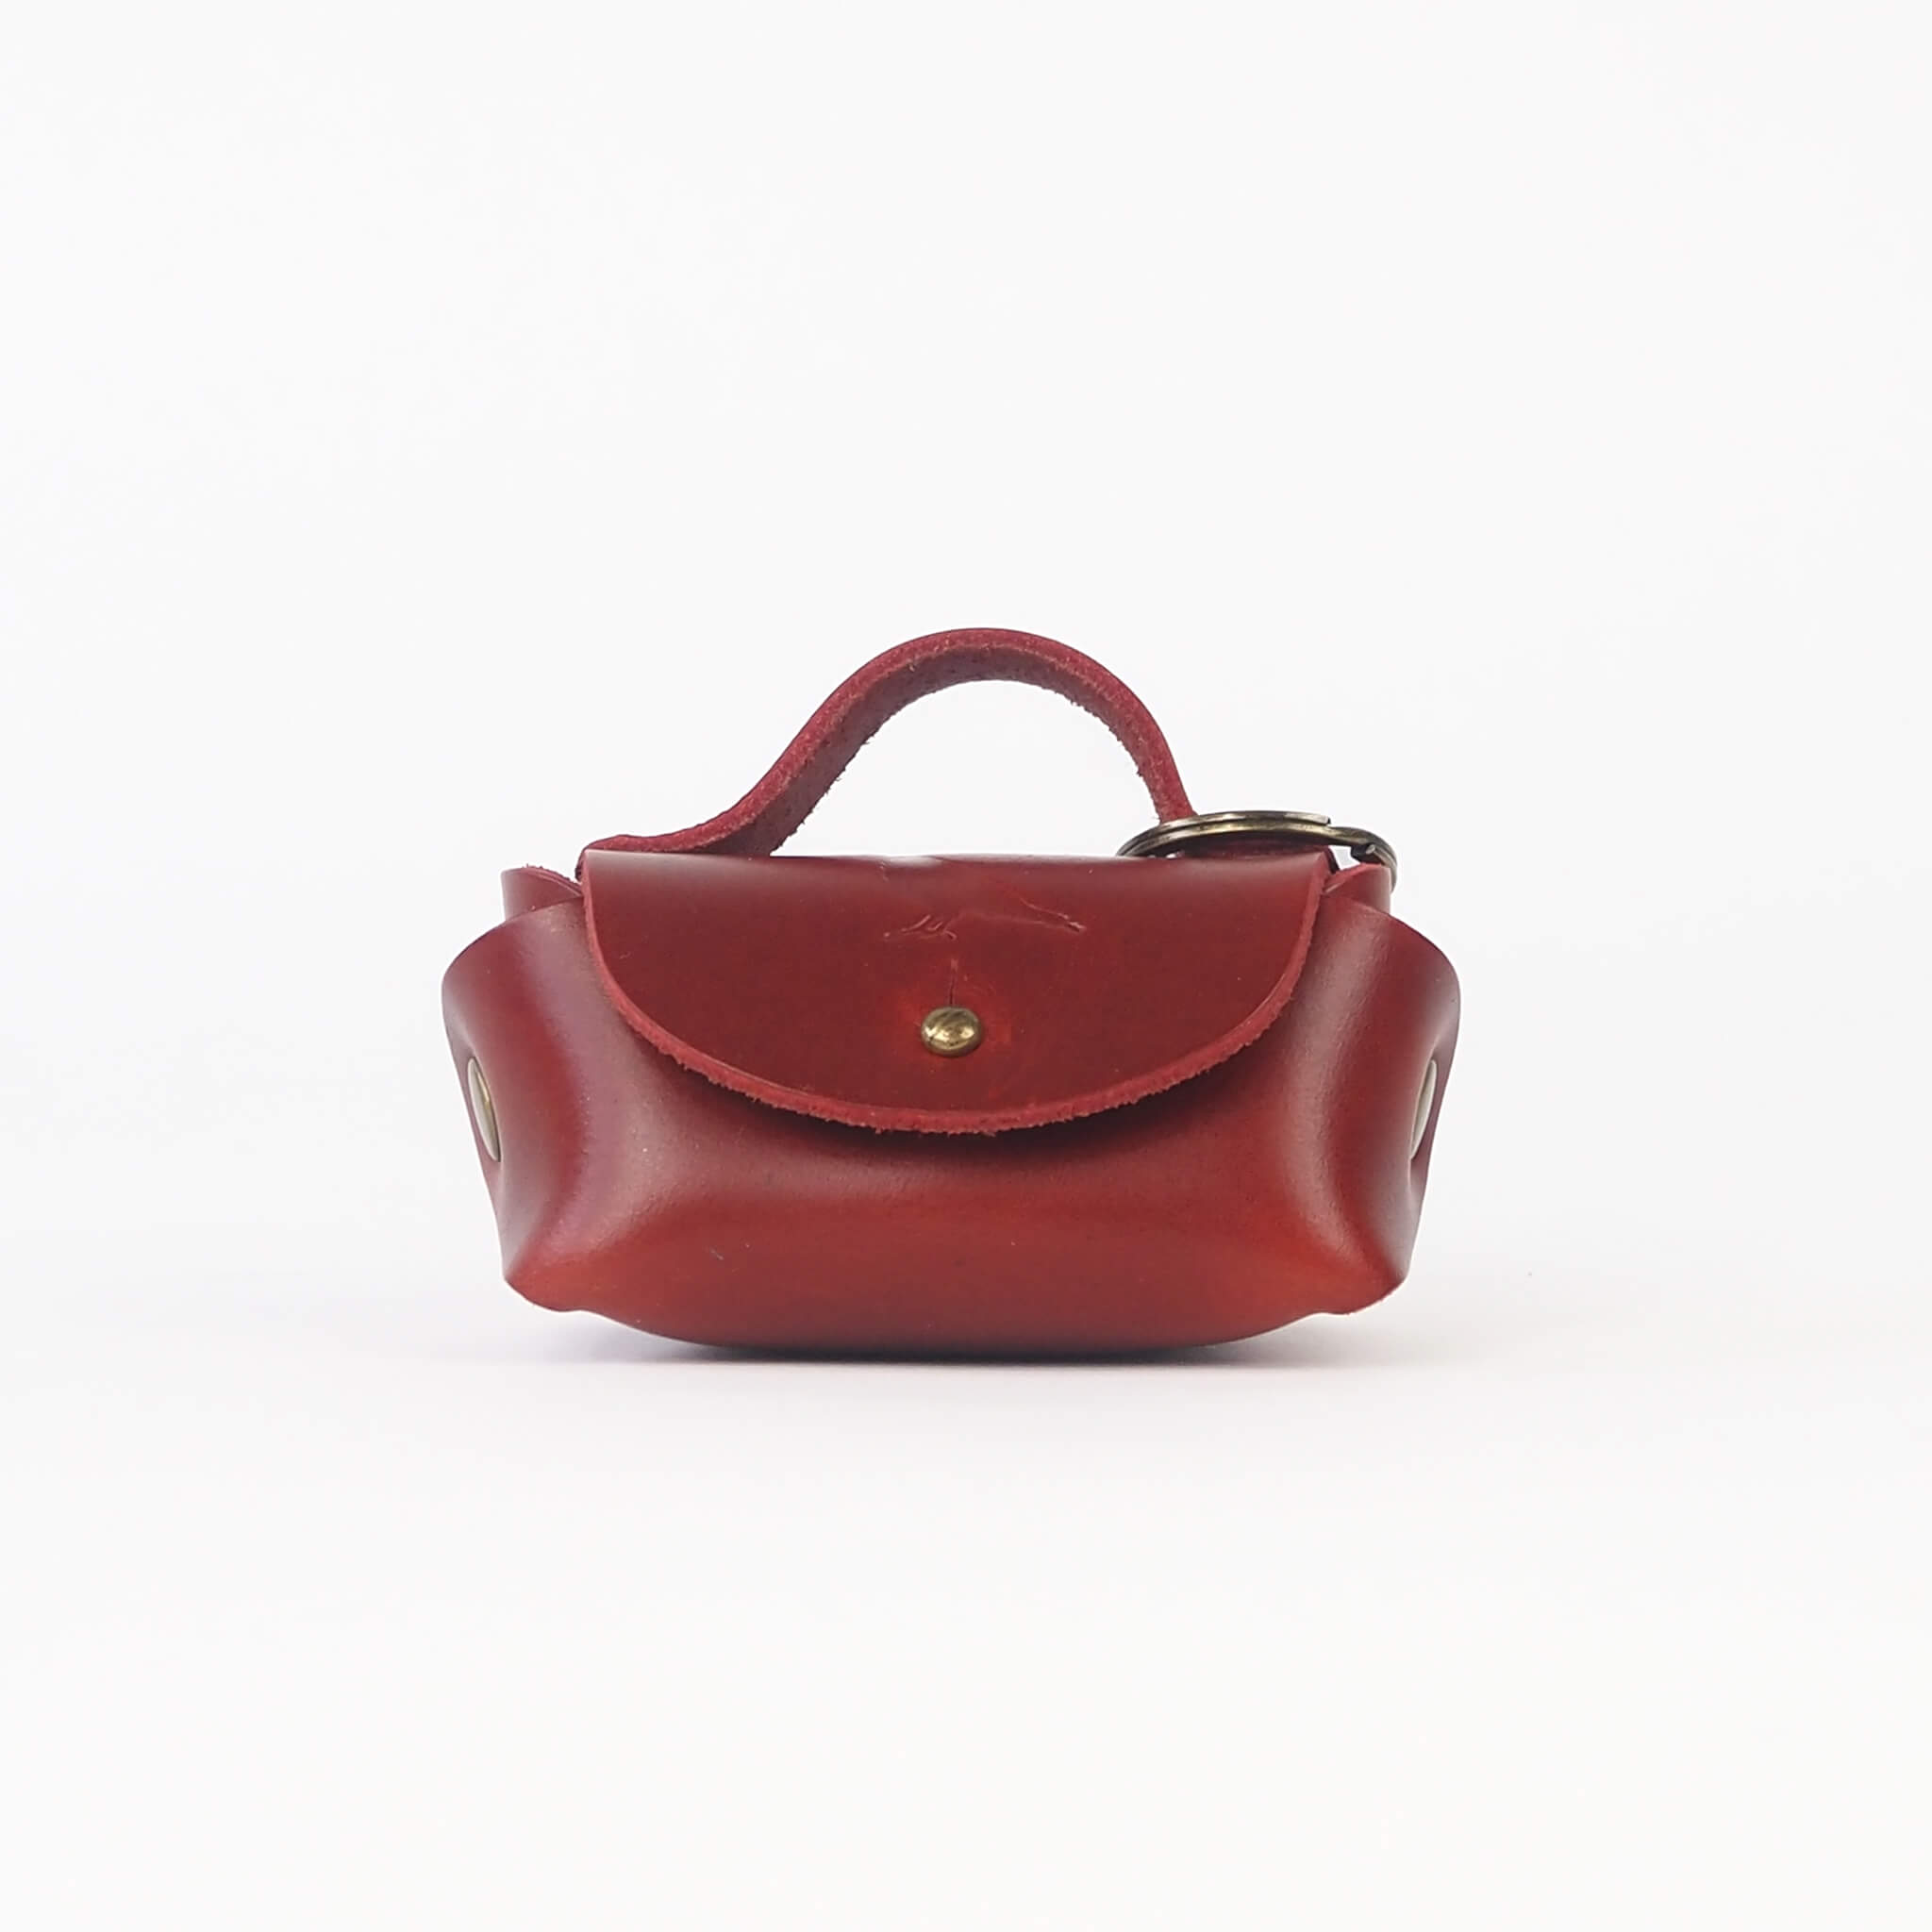 poo purse pet waste bag holder handmade leather - cherry front view